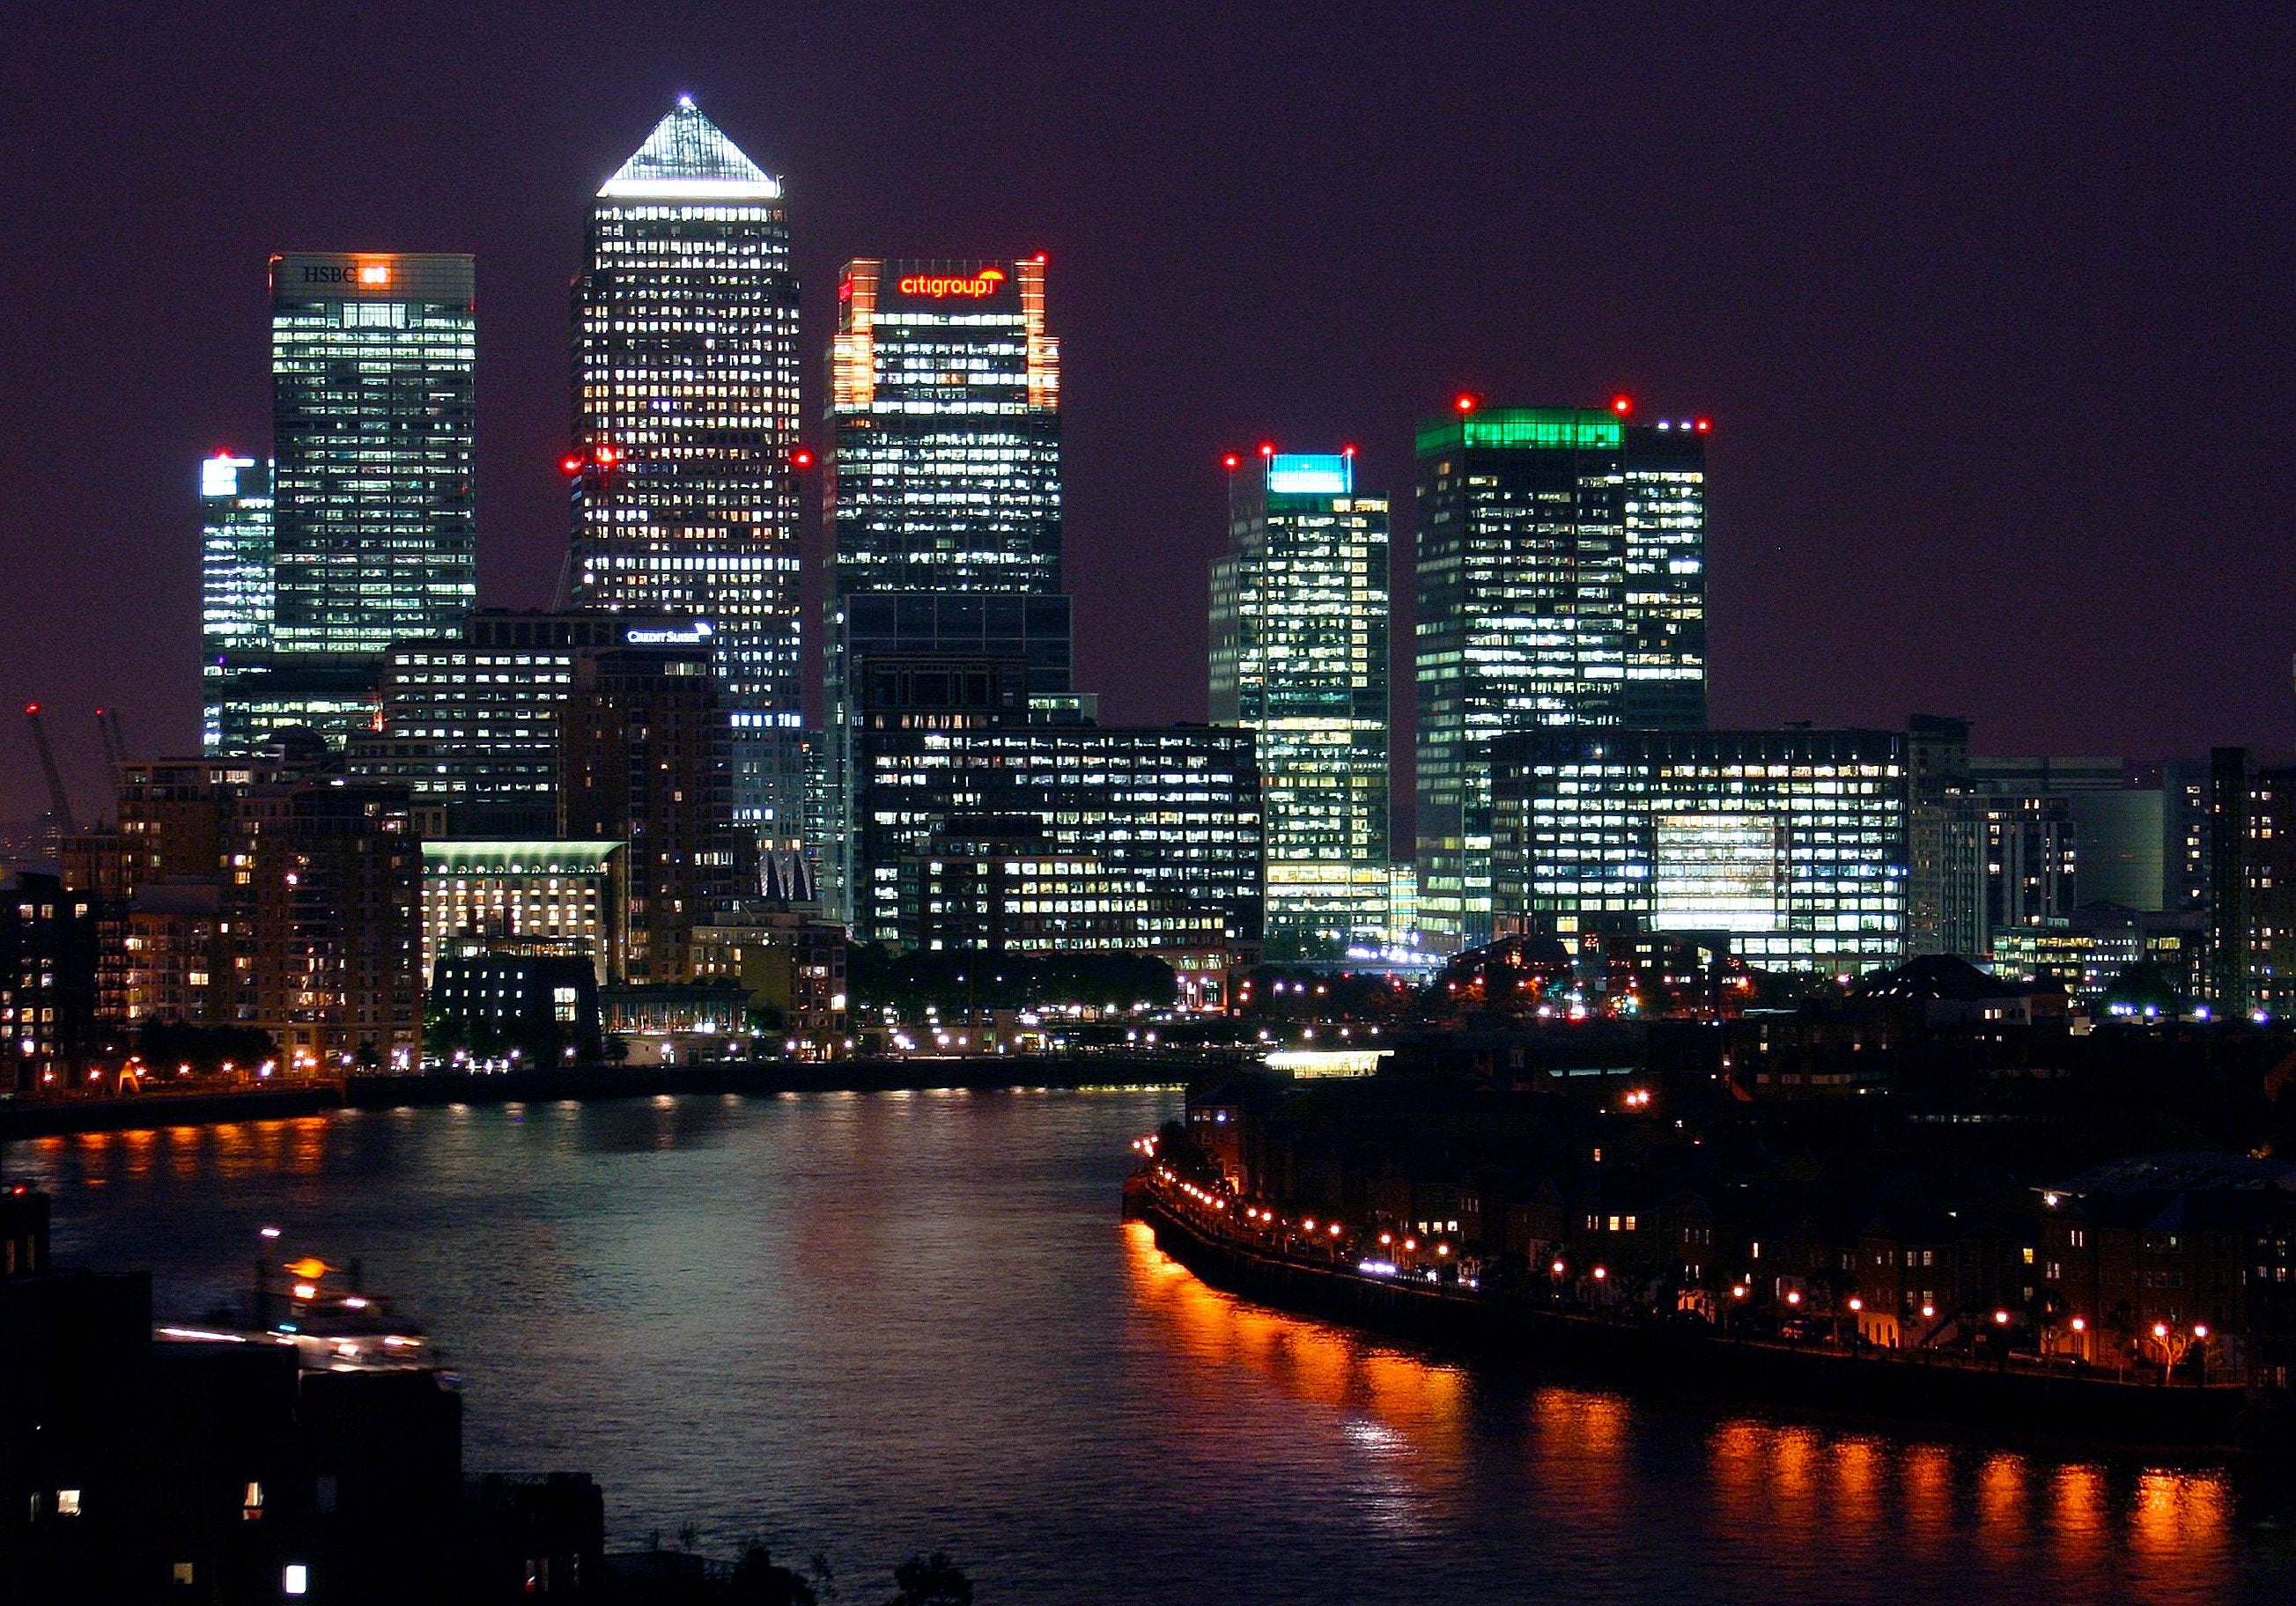 London one of top areas for colocation data centres